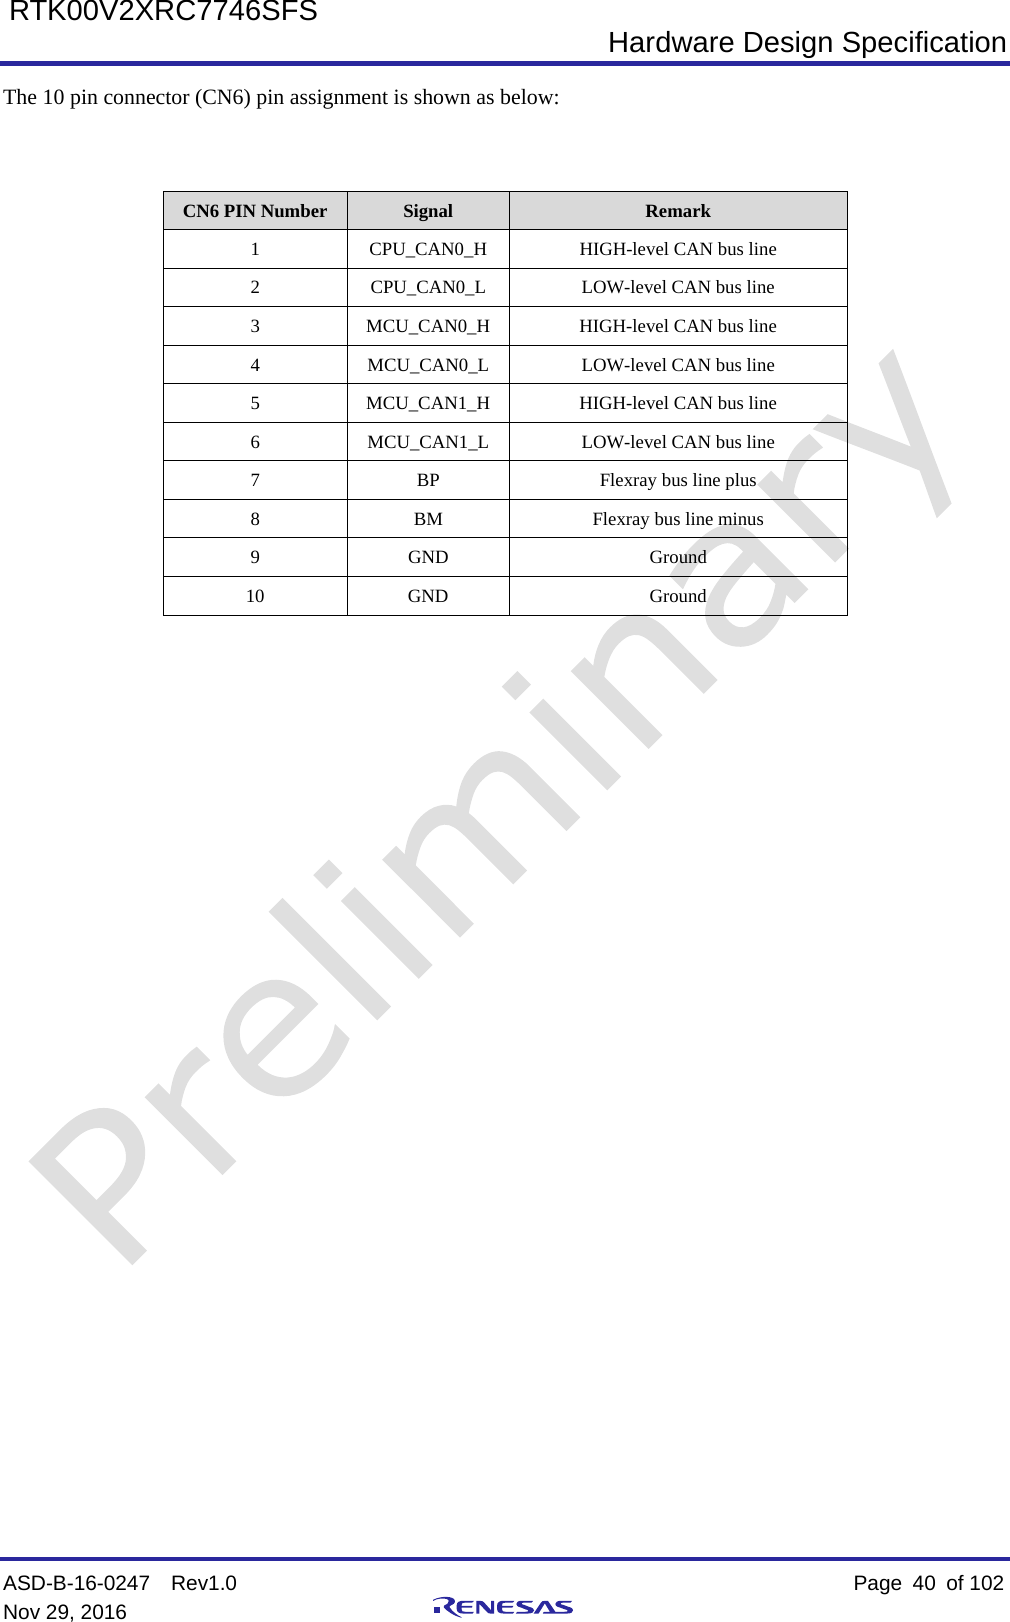  Hardware Design Specification ASD-B-16-0247  Rev1.0    Page  40 of 102 Nov 29, 2016     RTK00V2XRC7746SFS The 10 pin connector (CN6) pin assignment is shown as below:   CN6 PIN Number Signal  Remark 1  CPU_CAN0_H  HIGH-level CAN bus line 2  CPU_CAN0_L  LOW-level CAN bus line   3  MCU_CAN0_H HIGH-level CAN bus line 4  MCU_CAN0_L  LOW-level CAN bus line 5  MCU_CAN1_H HIGH-level CAN bus line 6  MCU_CAN1_L  LOW-level CAN bus line 7  BP  Flexray bus line plus   8  BM  Flexray bus line minus 9  GND  Ground 10  GND  Ground                        